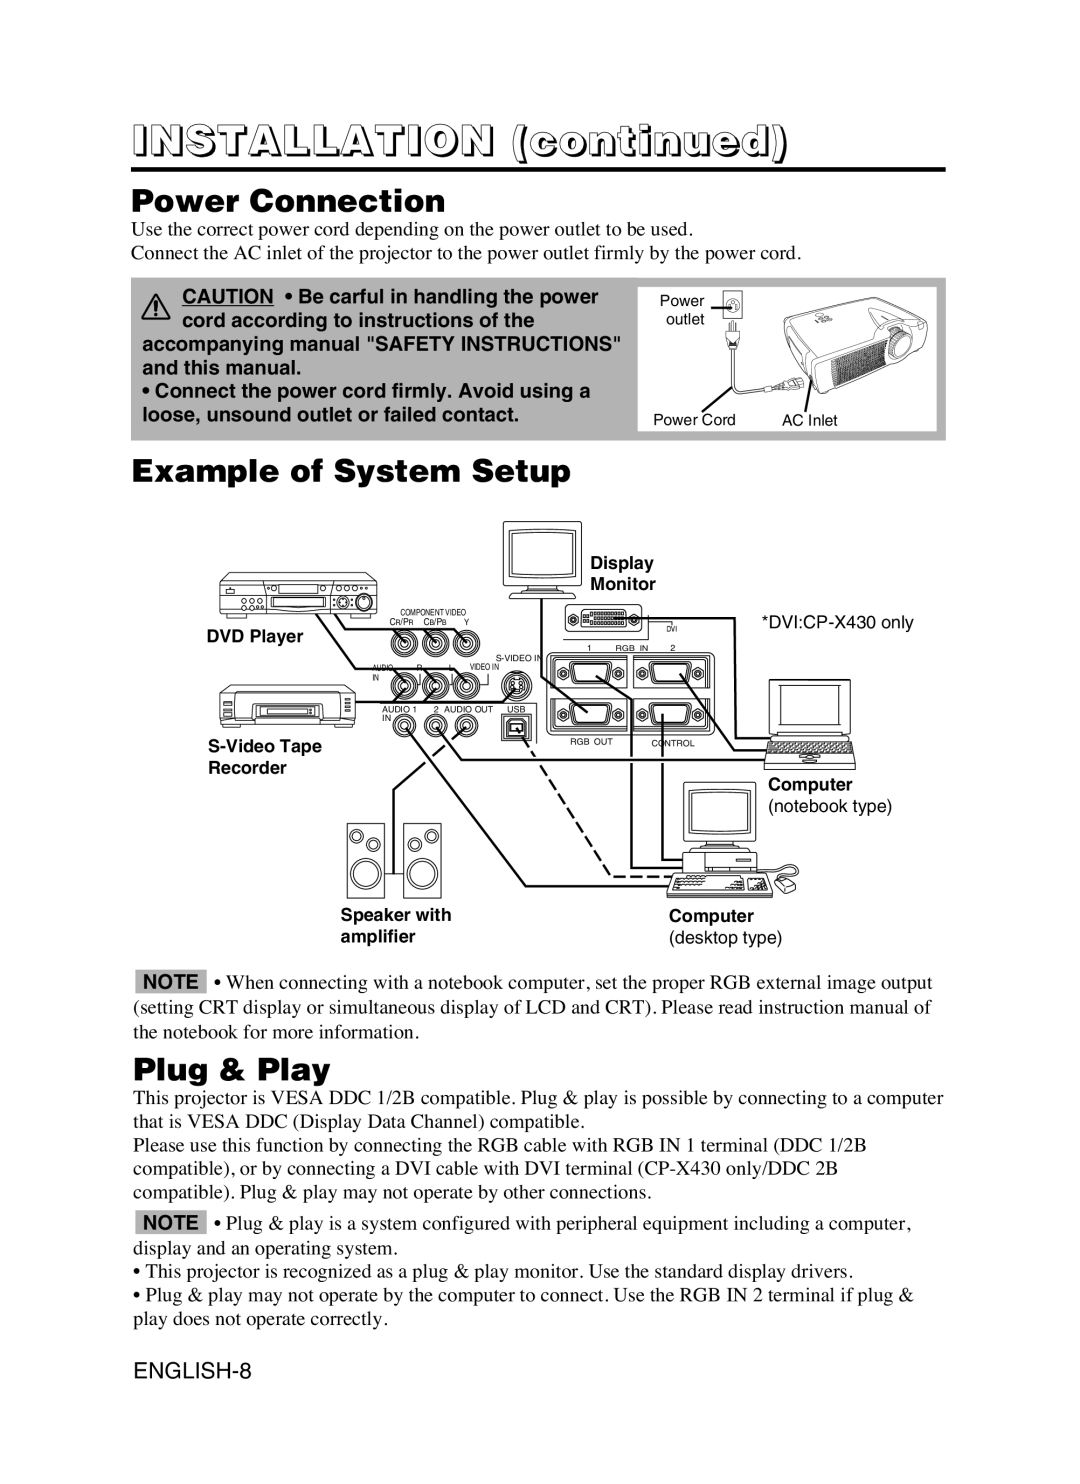 Dukane 8053 user manual Power Connection, Example of System Setup, Plug & Play, INSTALLATION continued, ENGLISH-8 